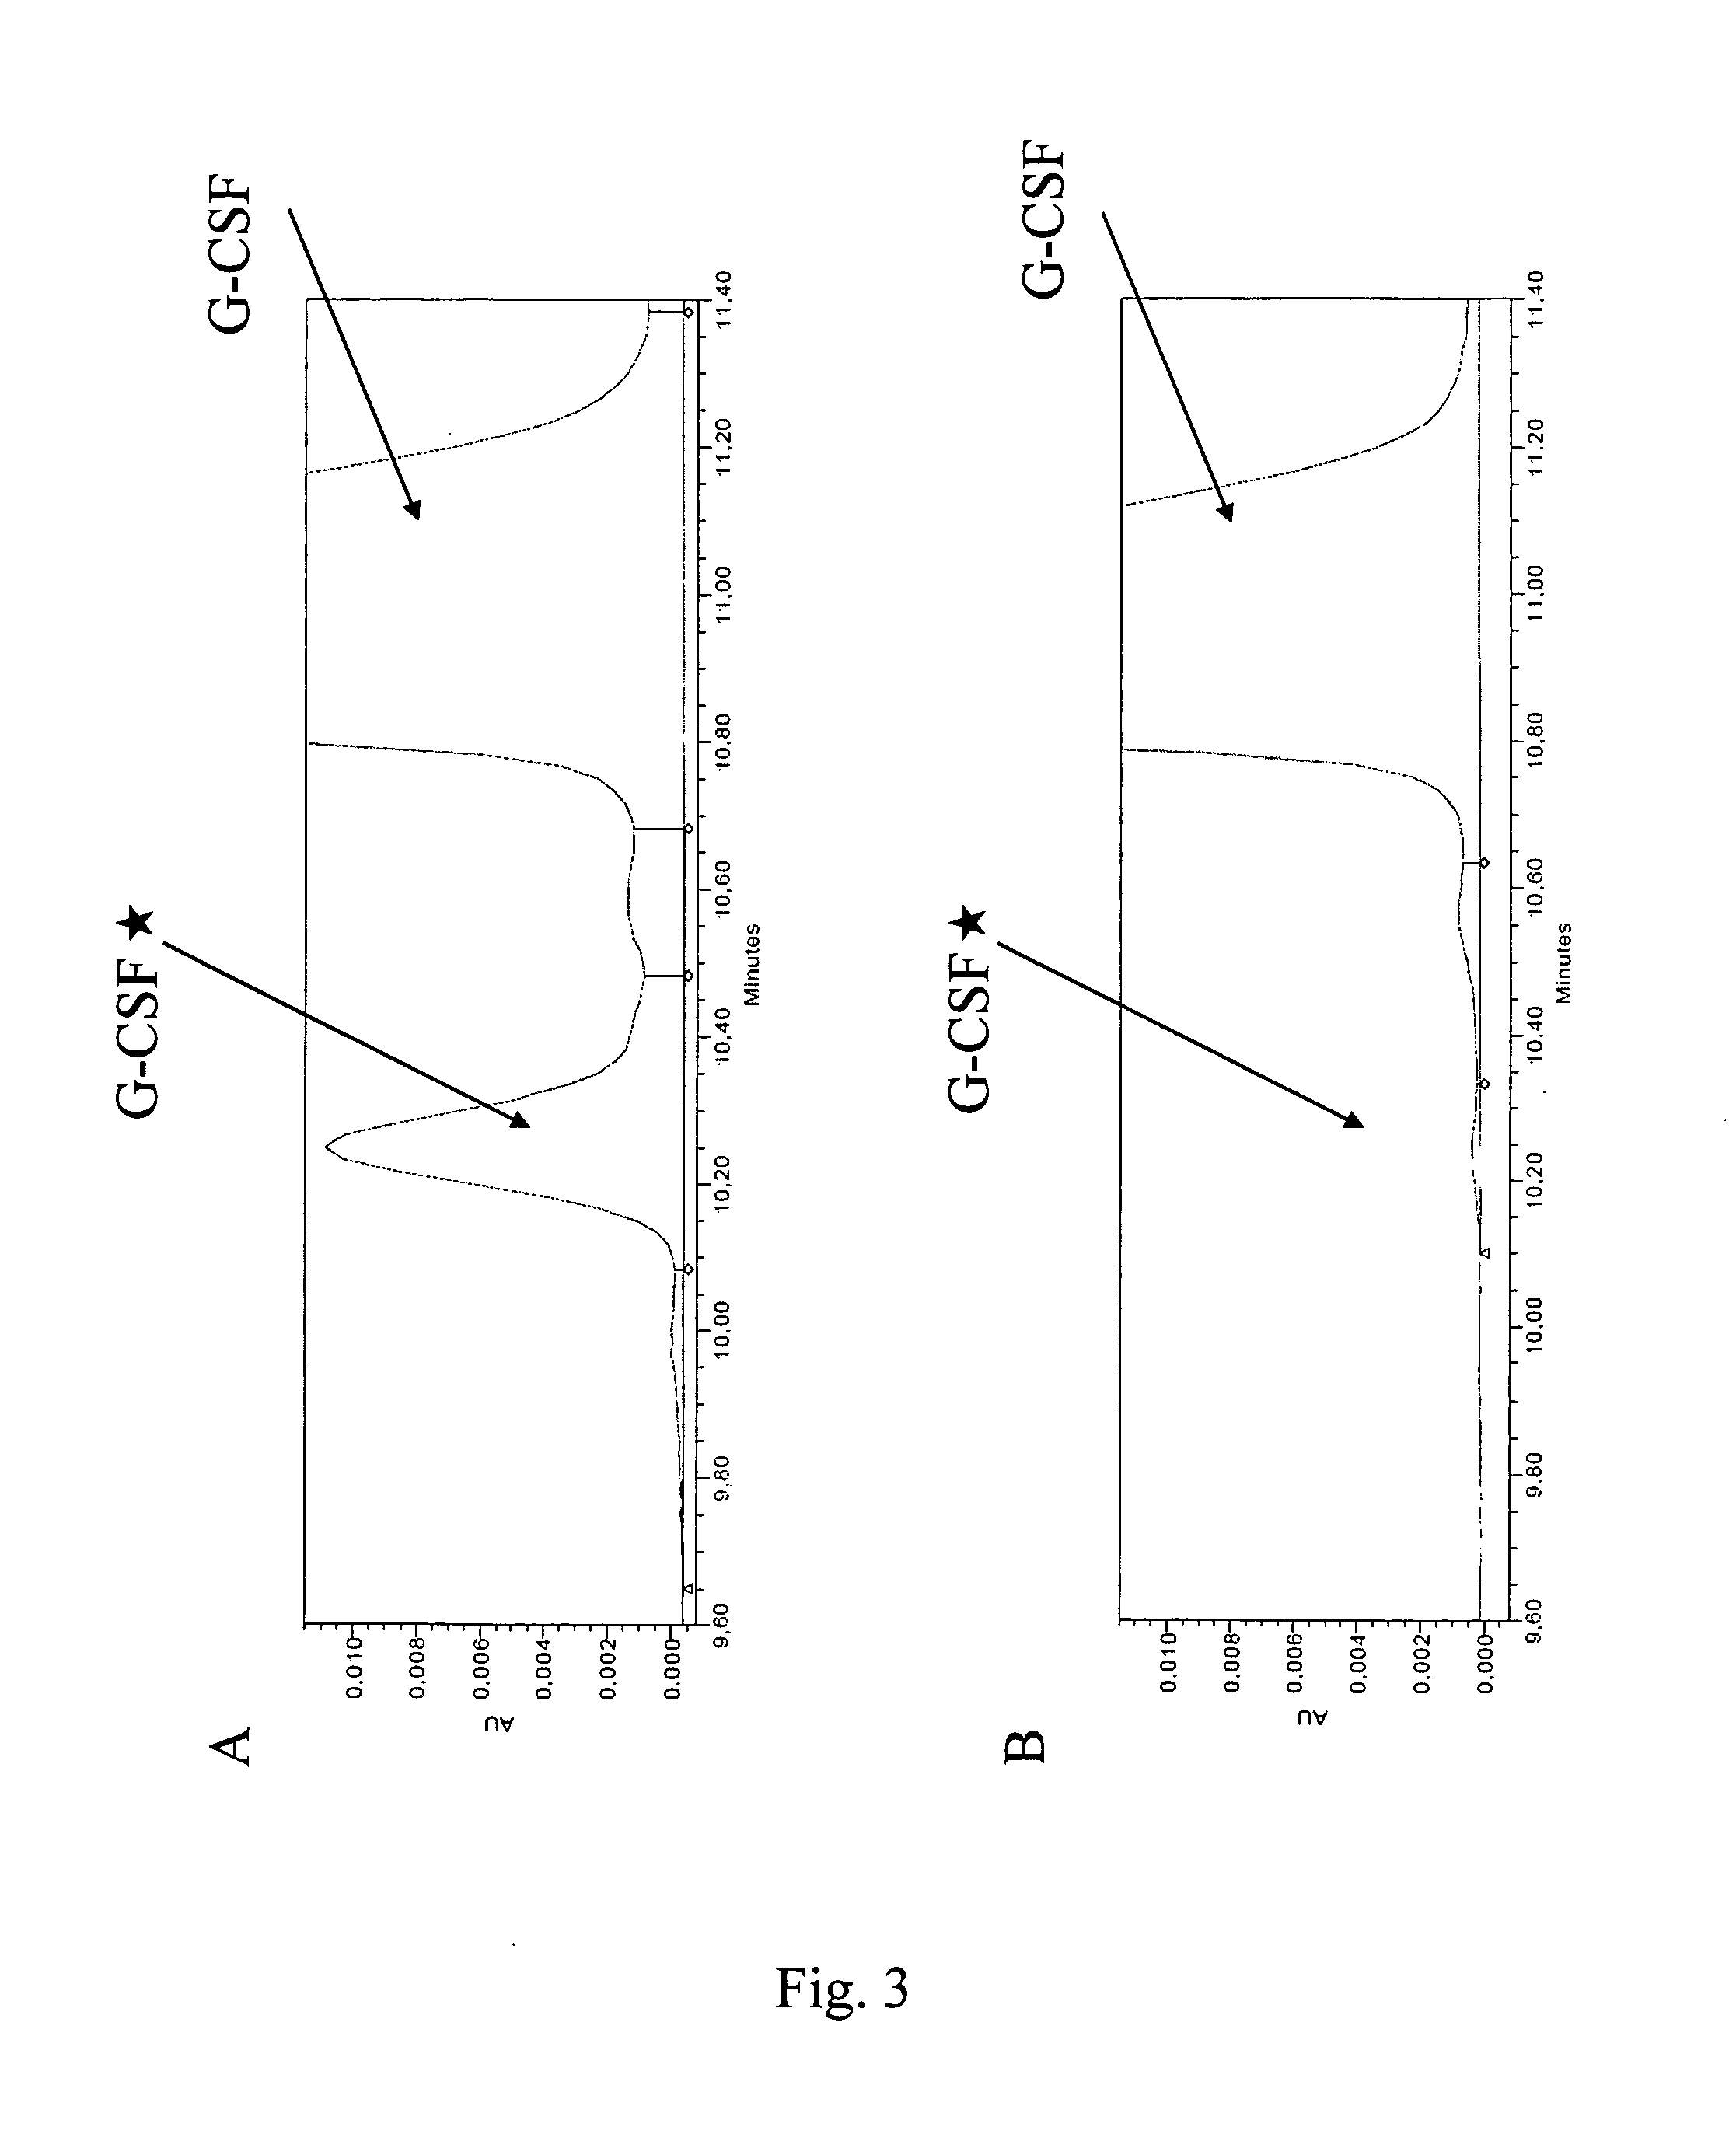 Method for obtaining biologically active recombinant human g-csf